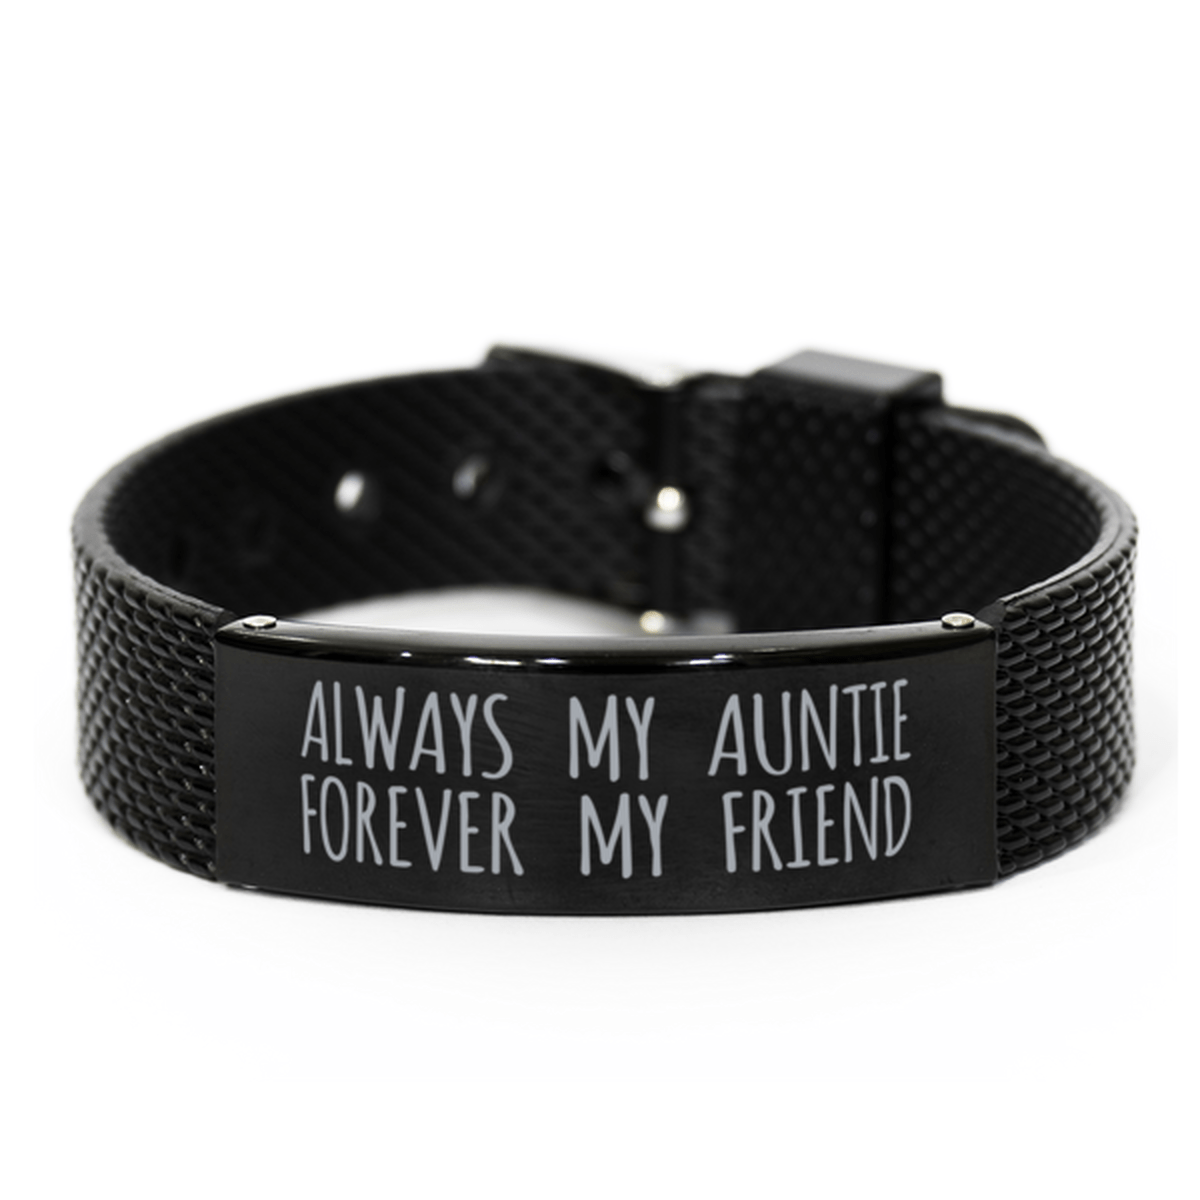 Inspirational Auntie Black Shark Mesh Bracelet, Always My Auntie Forever My Friend, Best Birthday Gifts for Family Friends